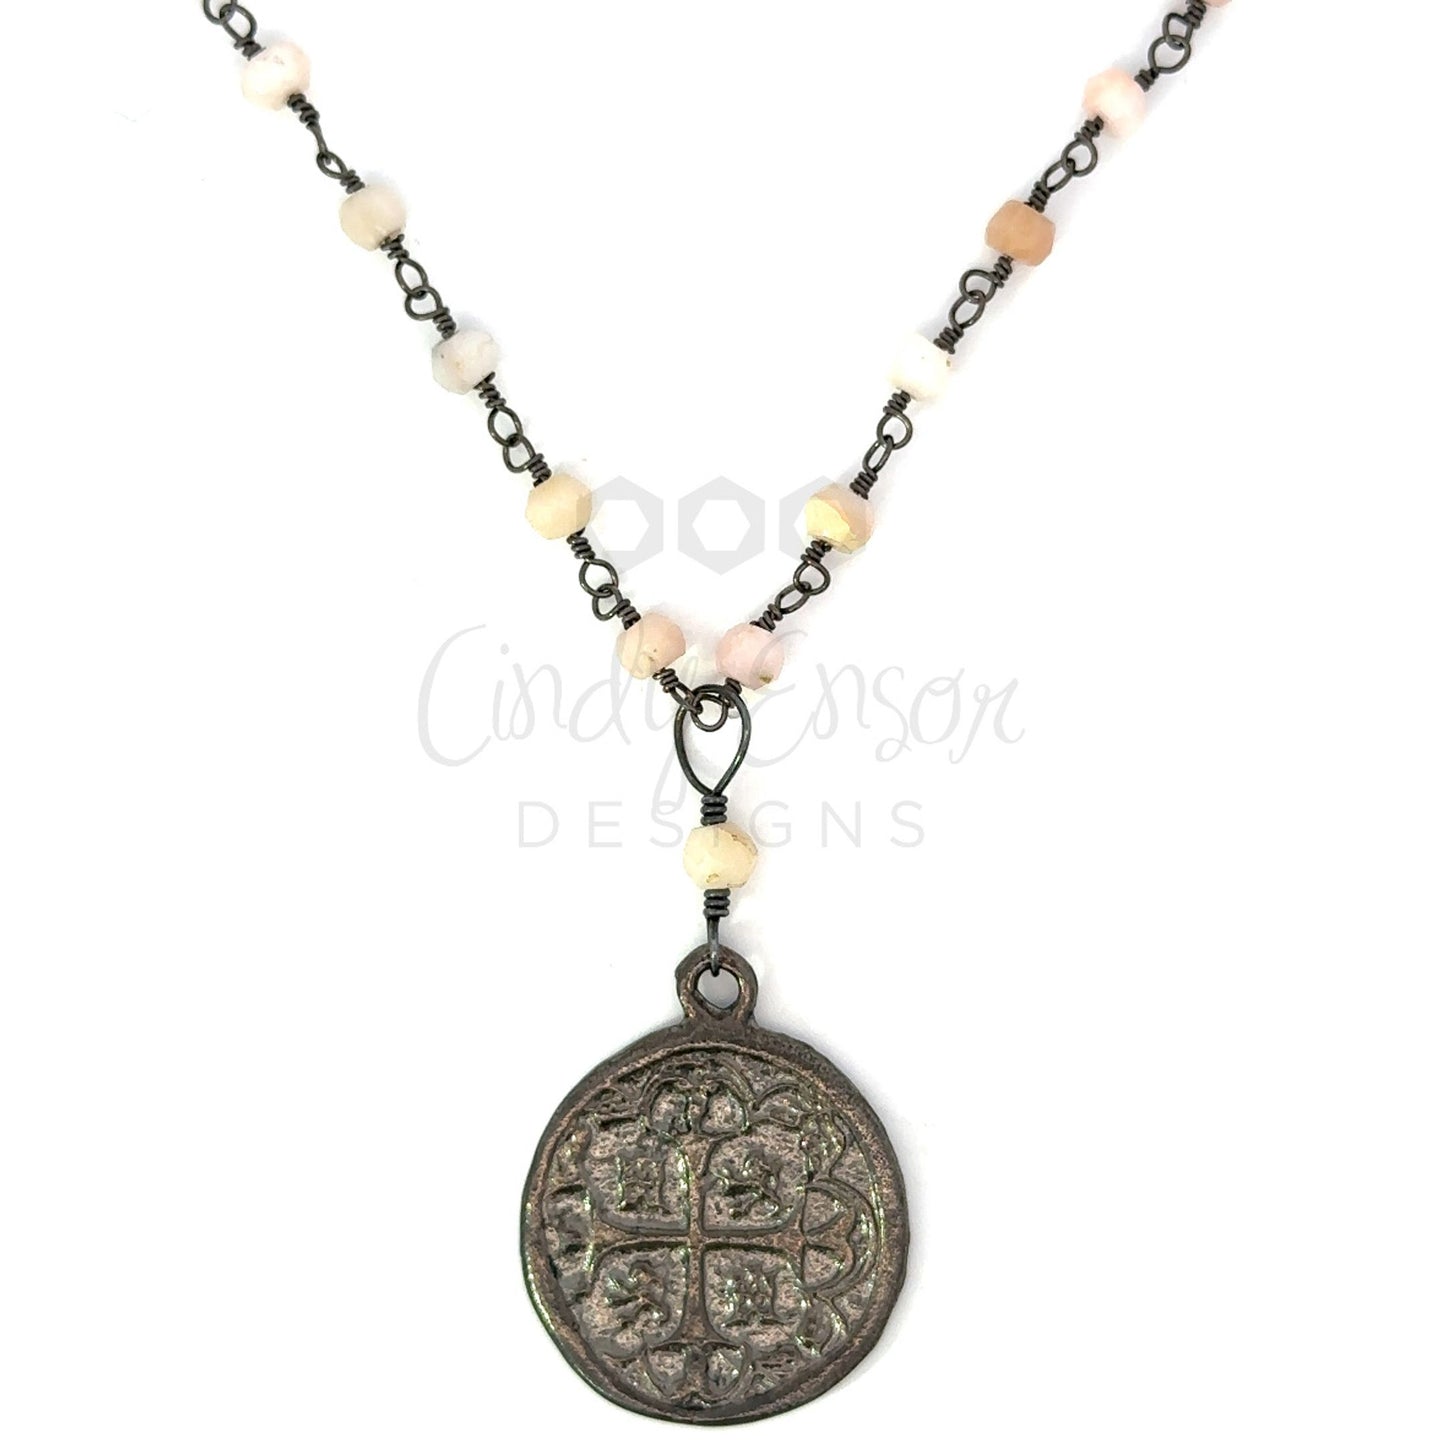 Spanish Coin Rosary Chain Necklace